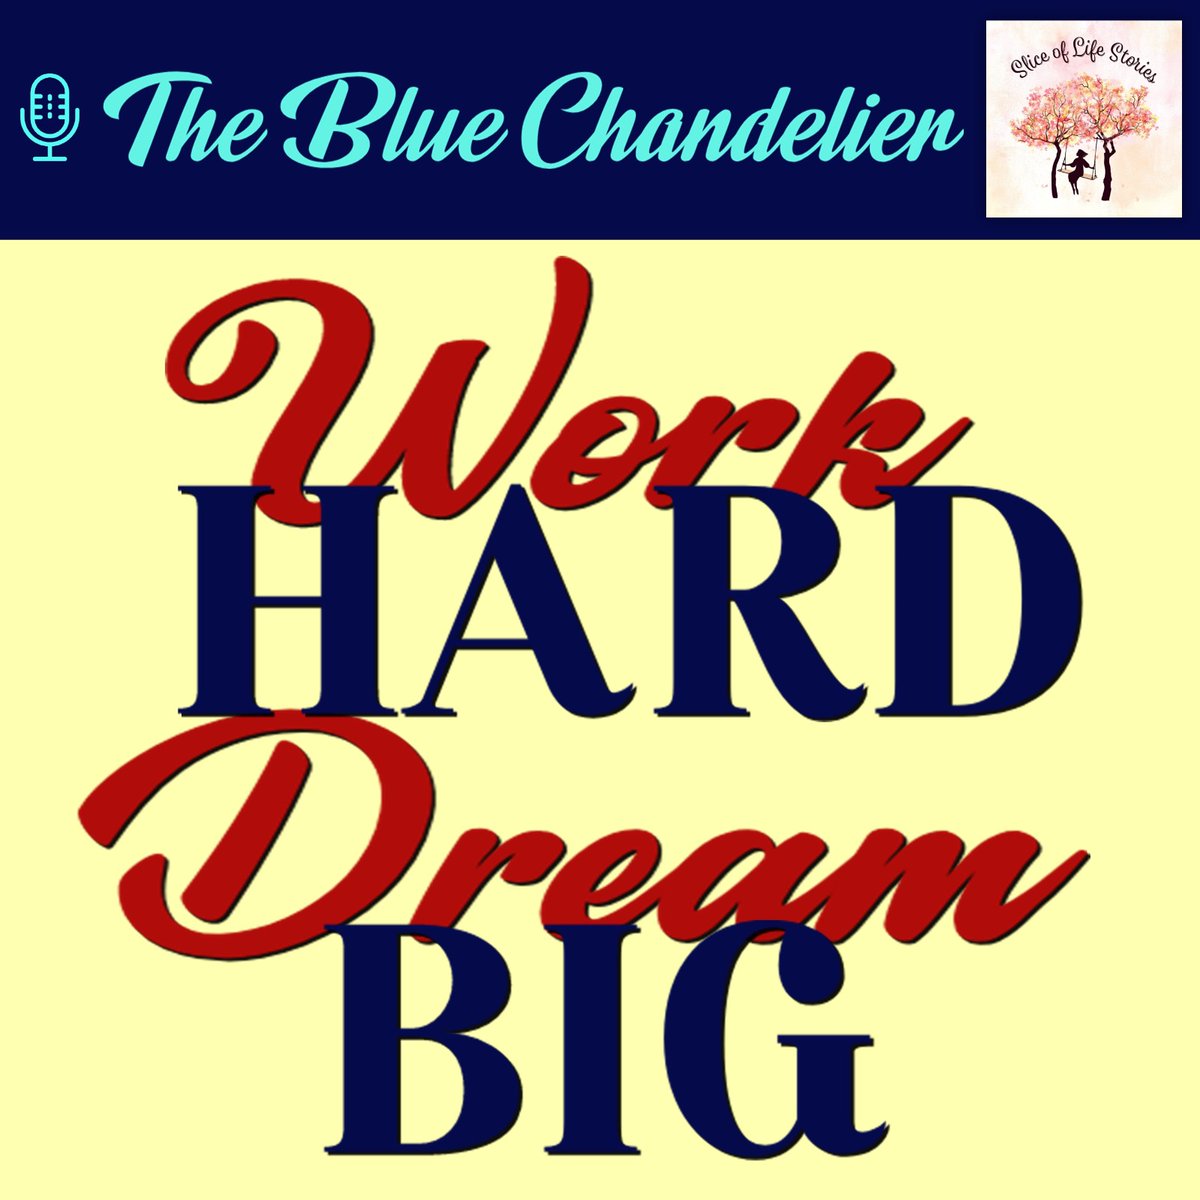 Work hard - Dream big with 🎙 The Blue Chandelier

▶ youtu.be/Vk2jafuK57E

#thebluechandelier #past #strange #reappear #intertwine #present #podcast #storytime #youtuber #audiopodcast #workhard #dreambig #podcaster #youtubestories #amazonmusic #itunes #souncloud #spotify